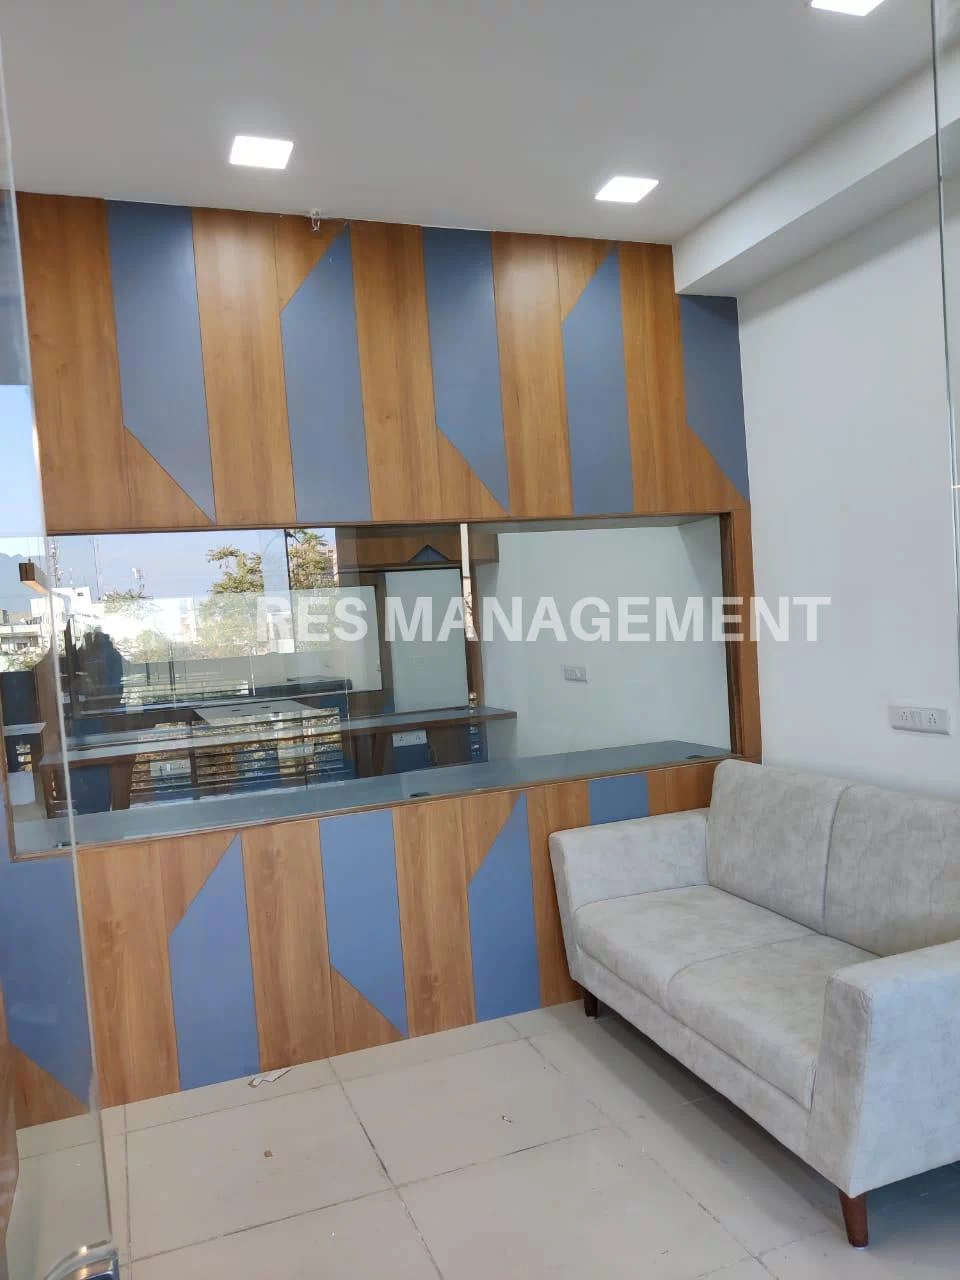 Office Space for Rent in TRP Mall, Bopal, Ahmedabad